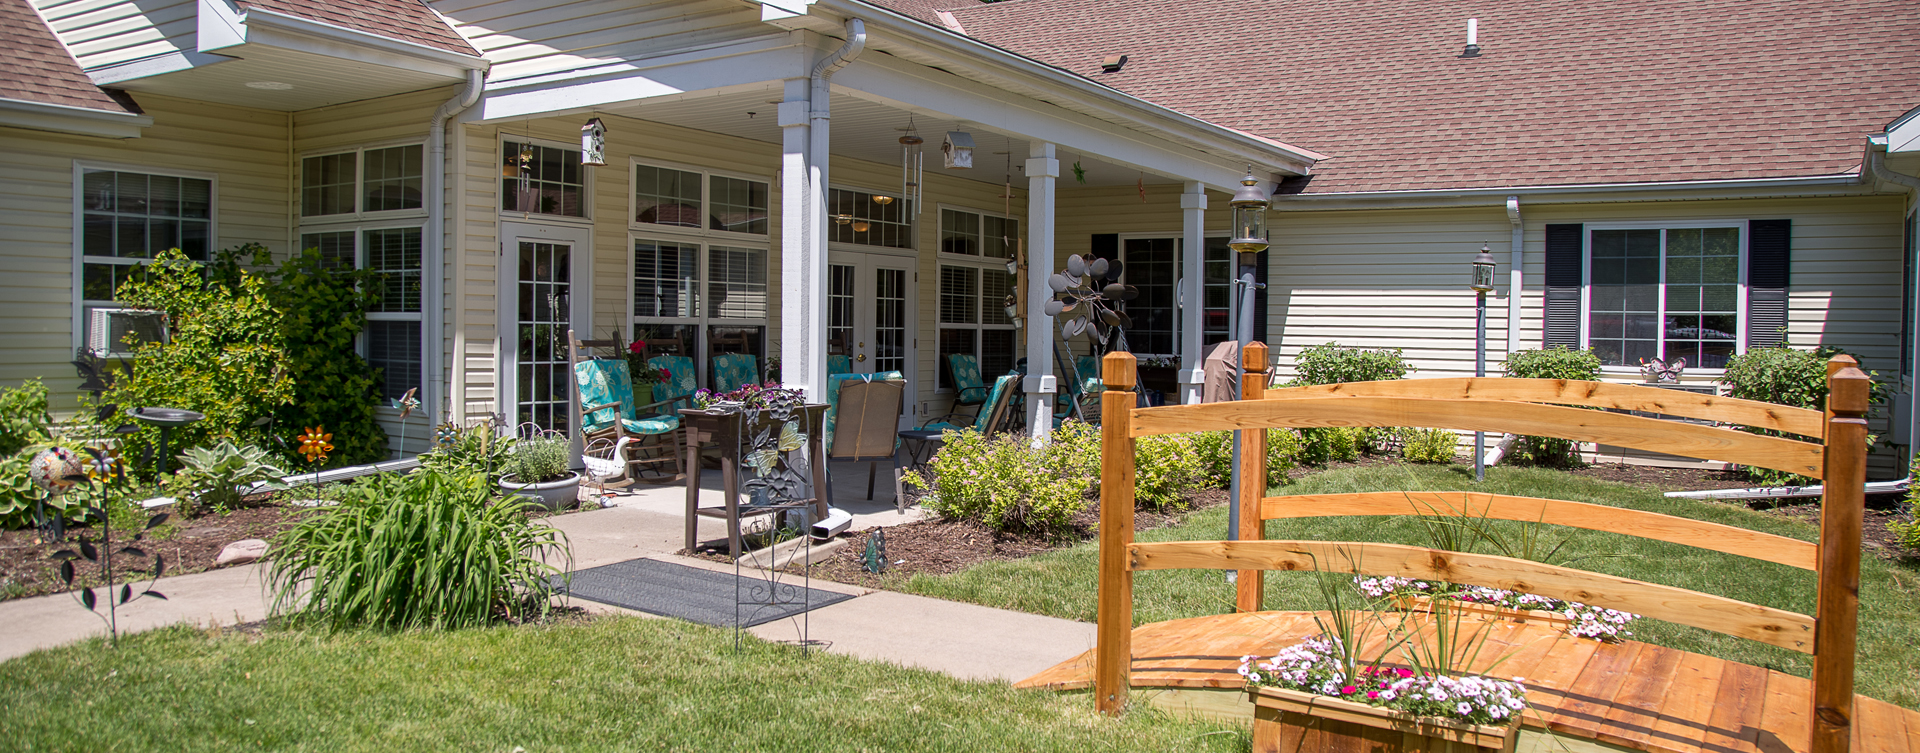 Enjoy bird watching, gardening and barbecuing in our courtyard at Bickford of Moline